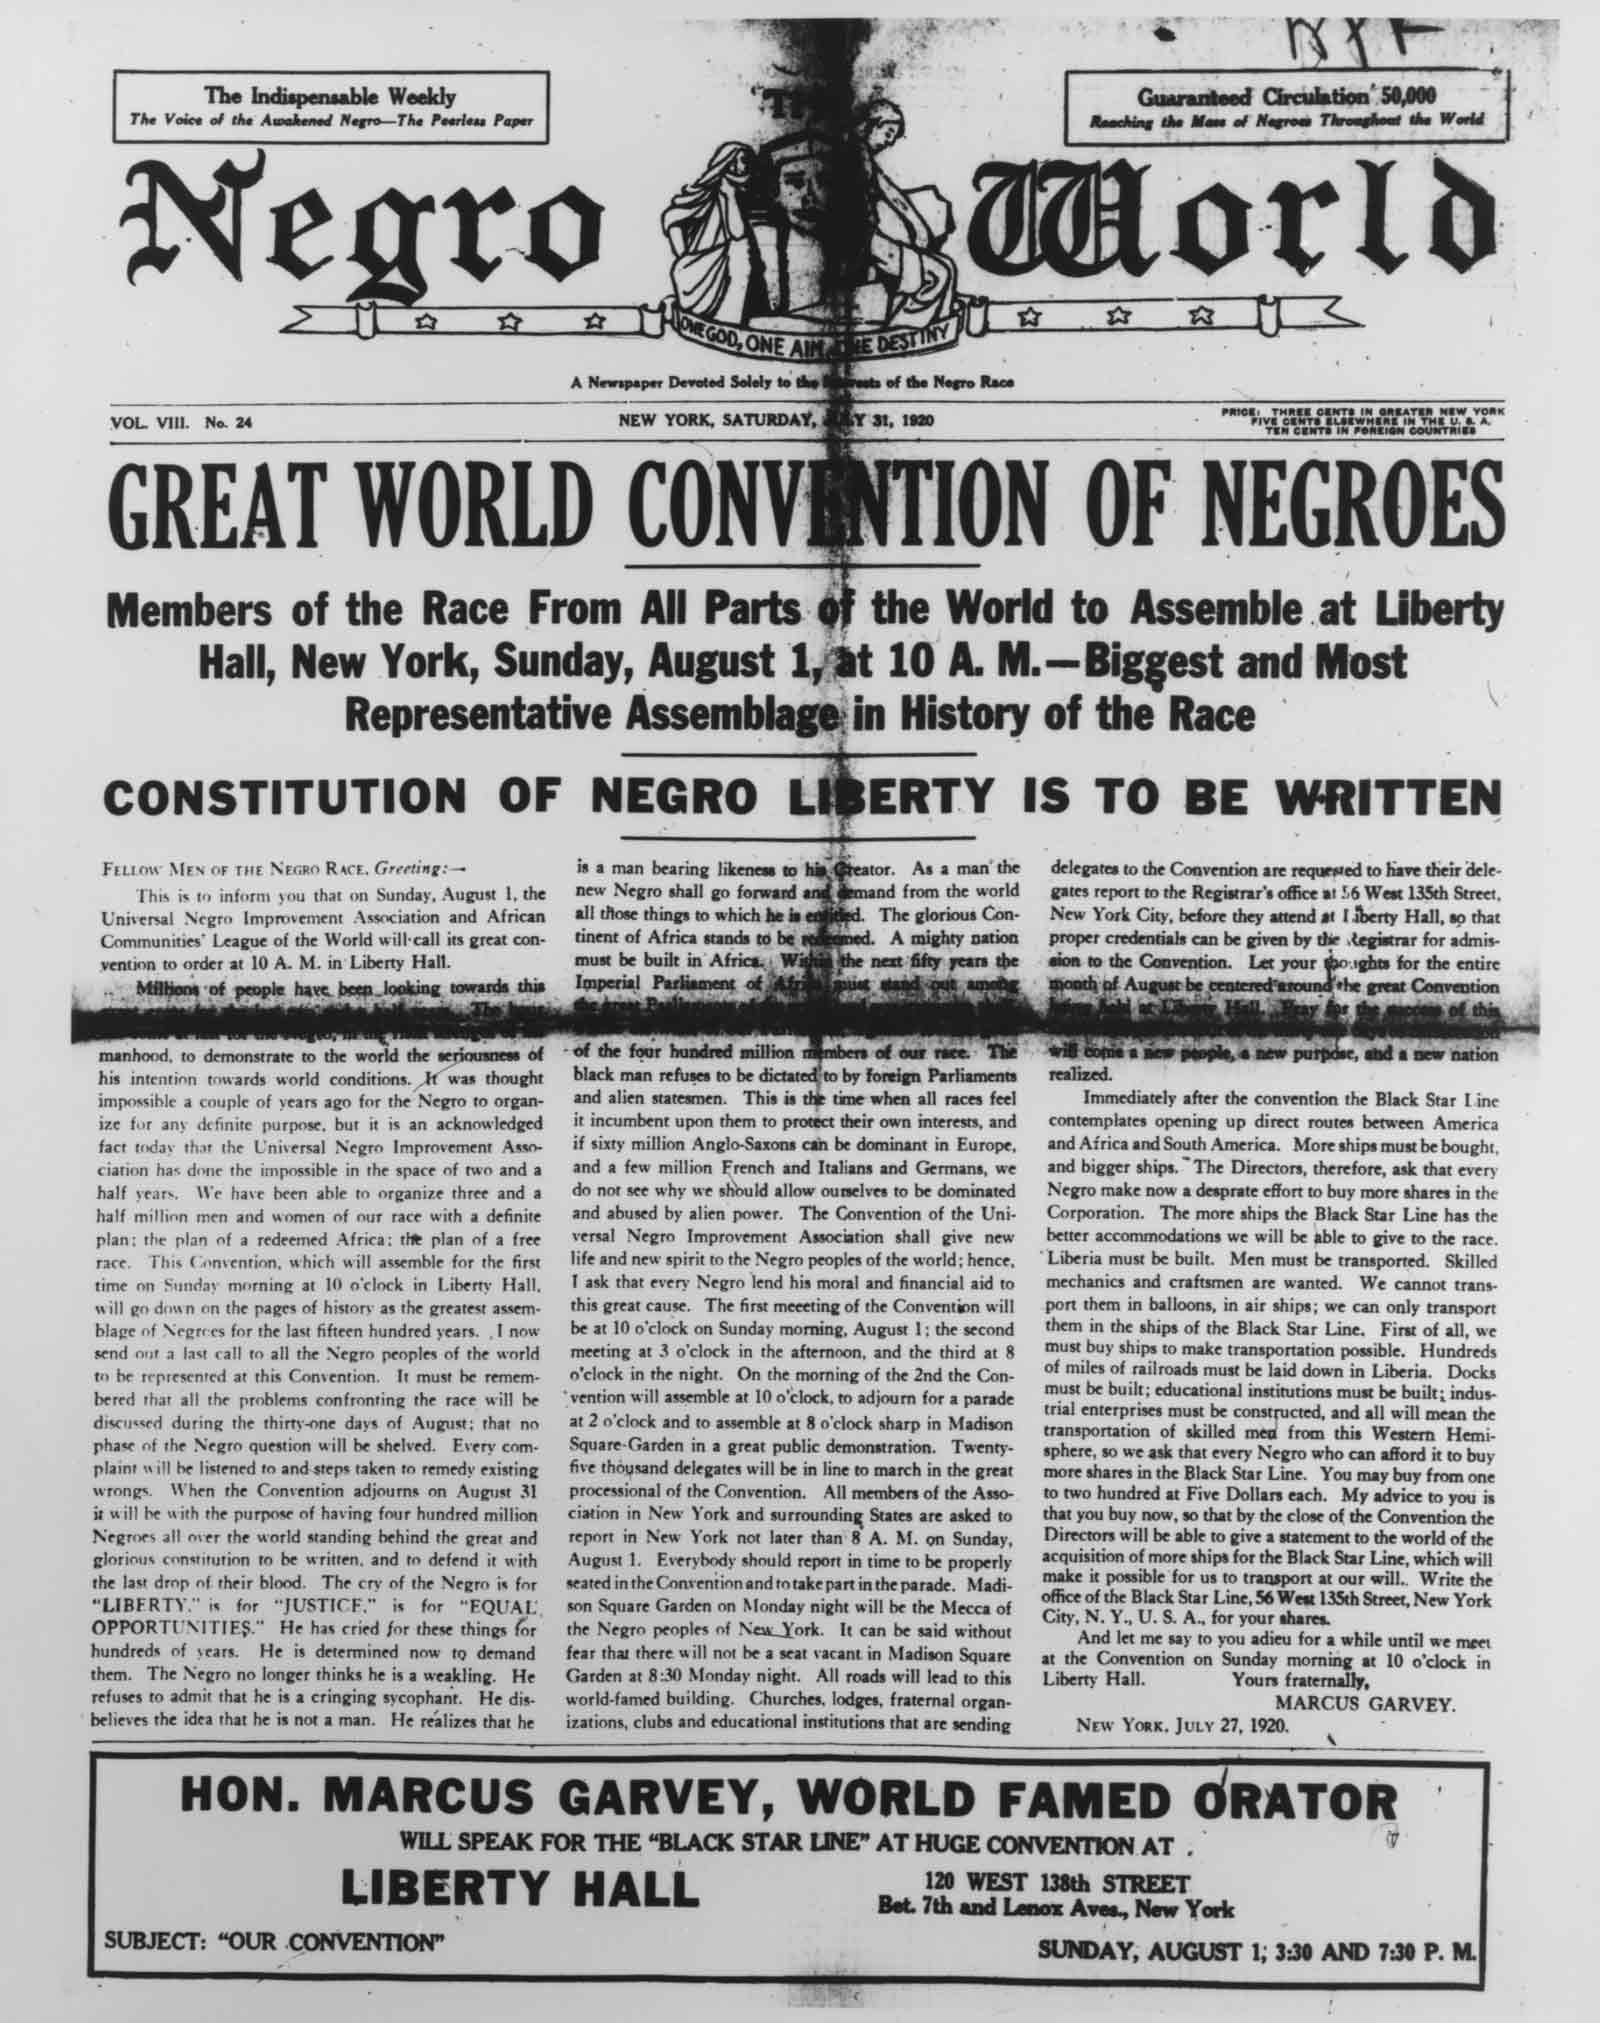 Cover of Negro World, 31 July 1920.